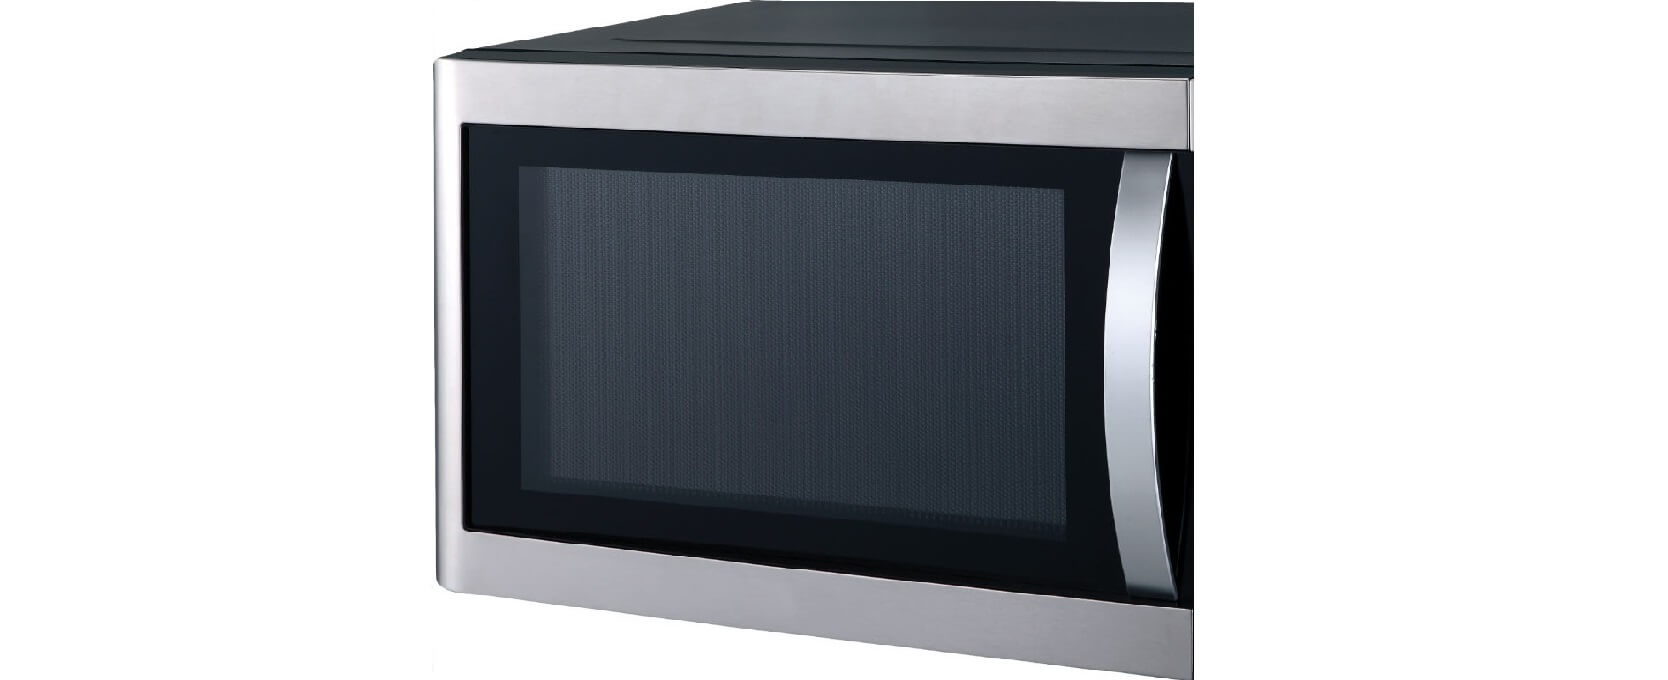 Smad 42L 900W Countertop Microwave Oven with pull open door & Cooking end signal